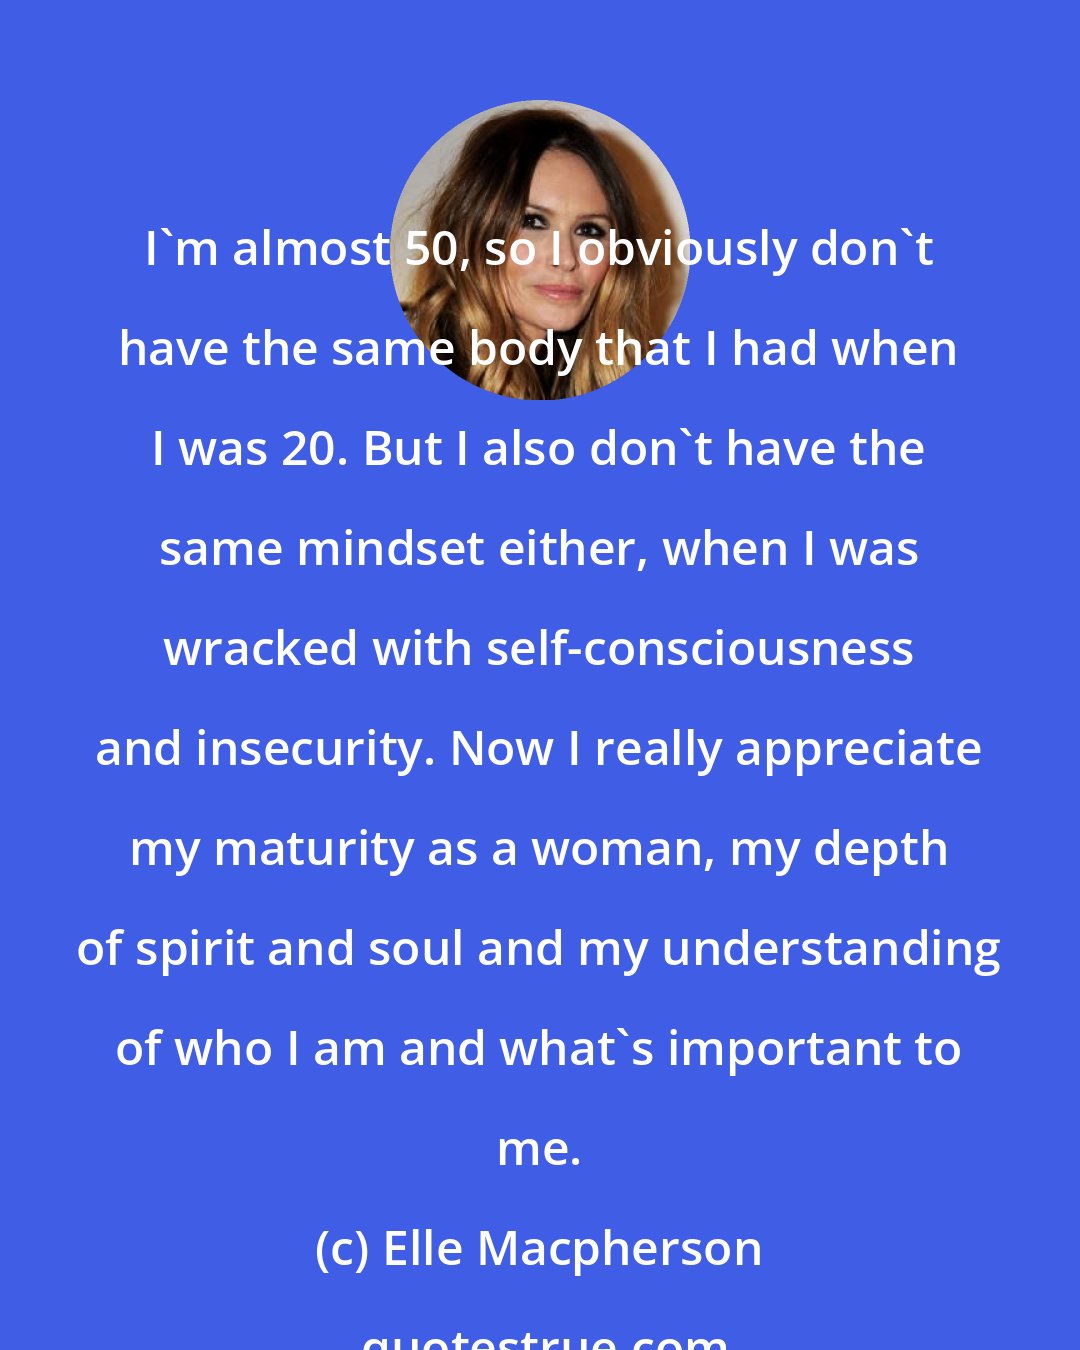 Elle Macpherson: I'm almost 50, so I obviously don't have the same body that I had when I was 20. But I also don't have the same mindset either, when I was wracked with self-consciousness and insecurity. Now I really appreciate my maturity as a woman, my depth of spirit and soul and my understanding of who I am and what's important to me.